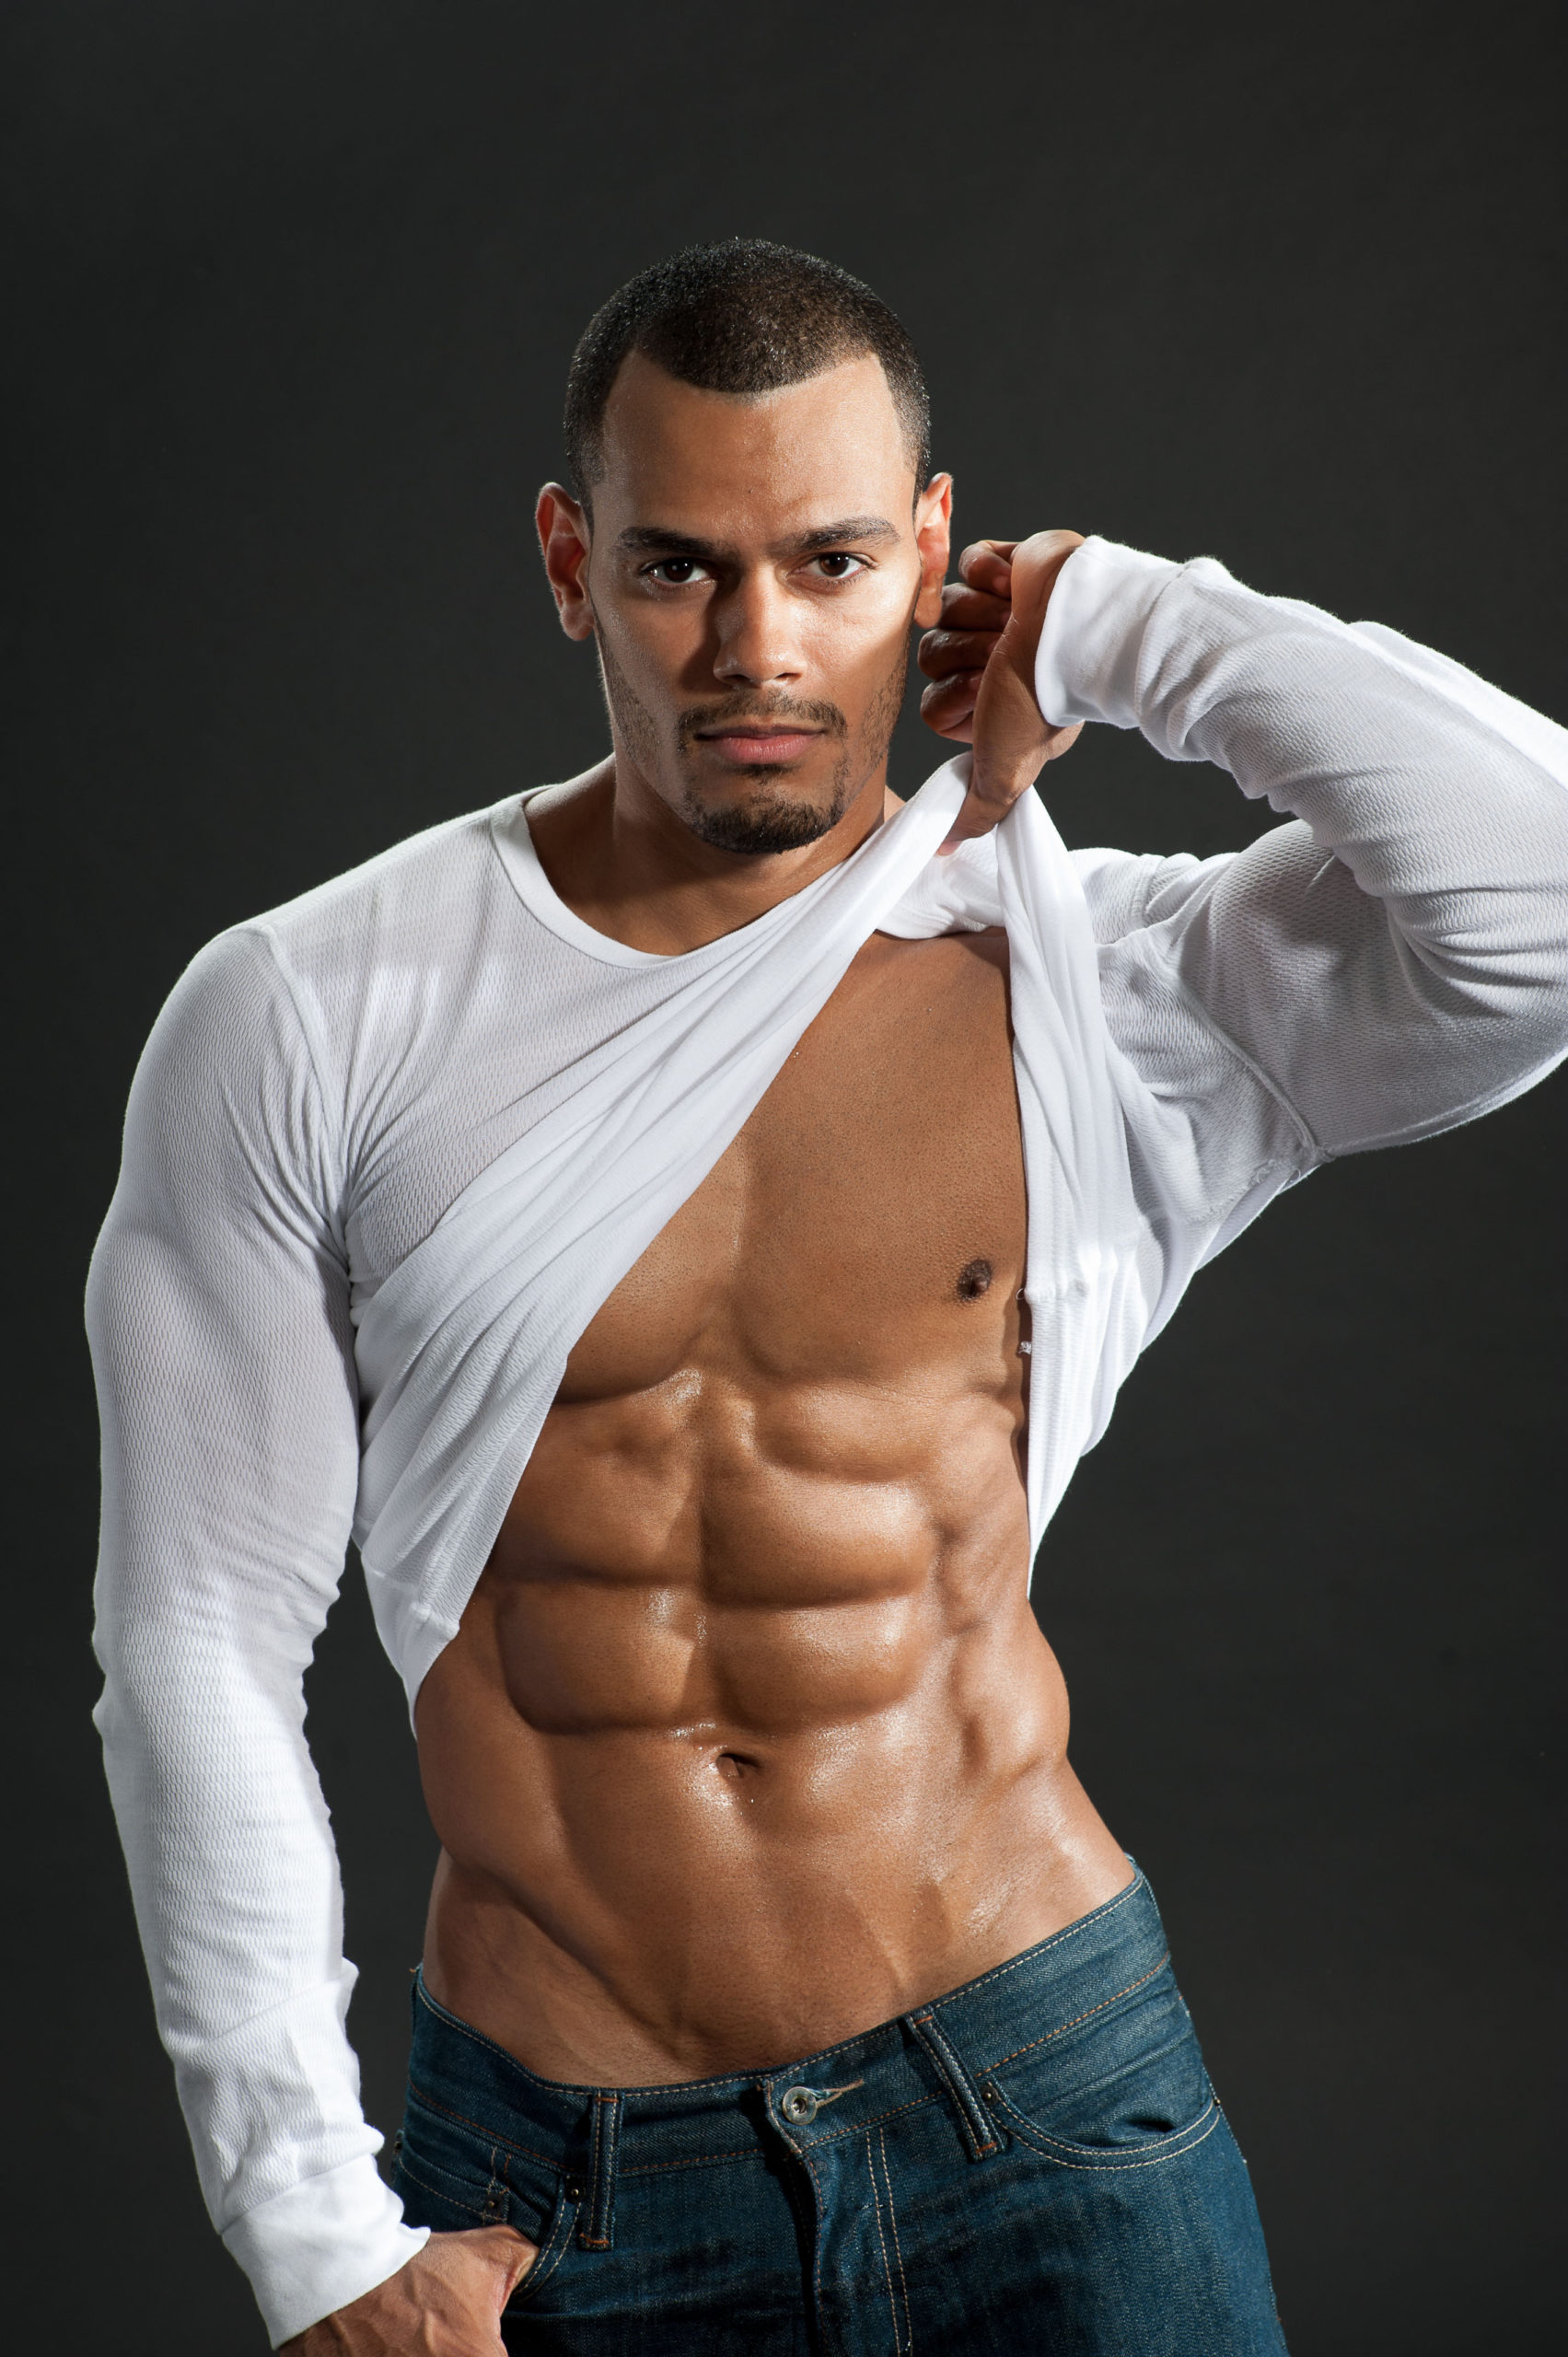 The Truth About Abs: What You Need to Know